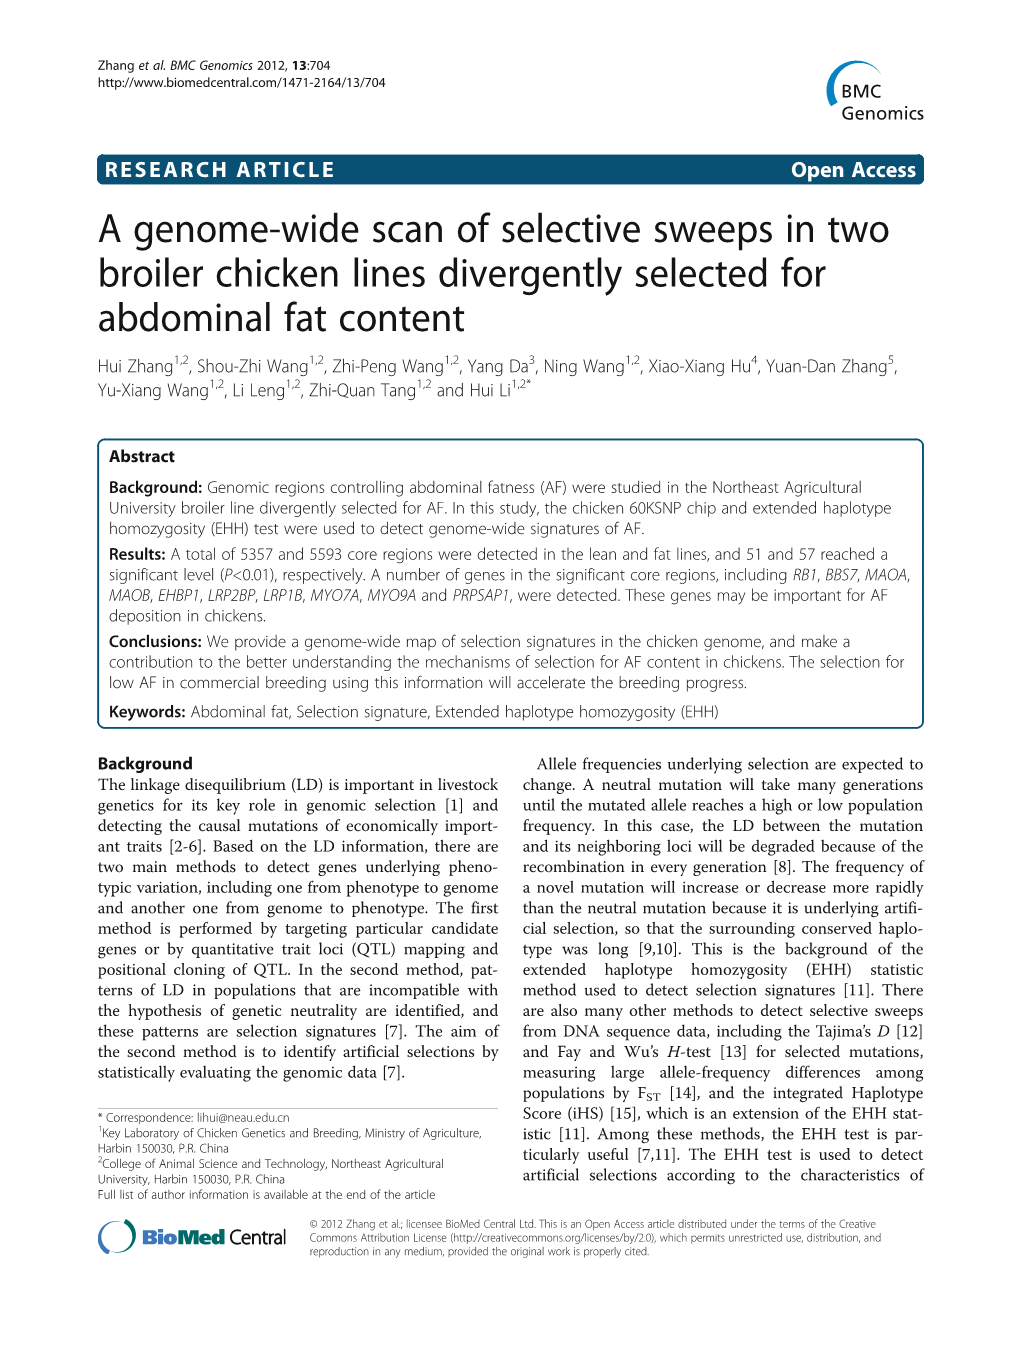 A Genome-Wide Scan of Selective Sweeps in Two Broiler Chicken Lines Divergently Selected for Abdominal Fat Content